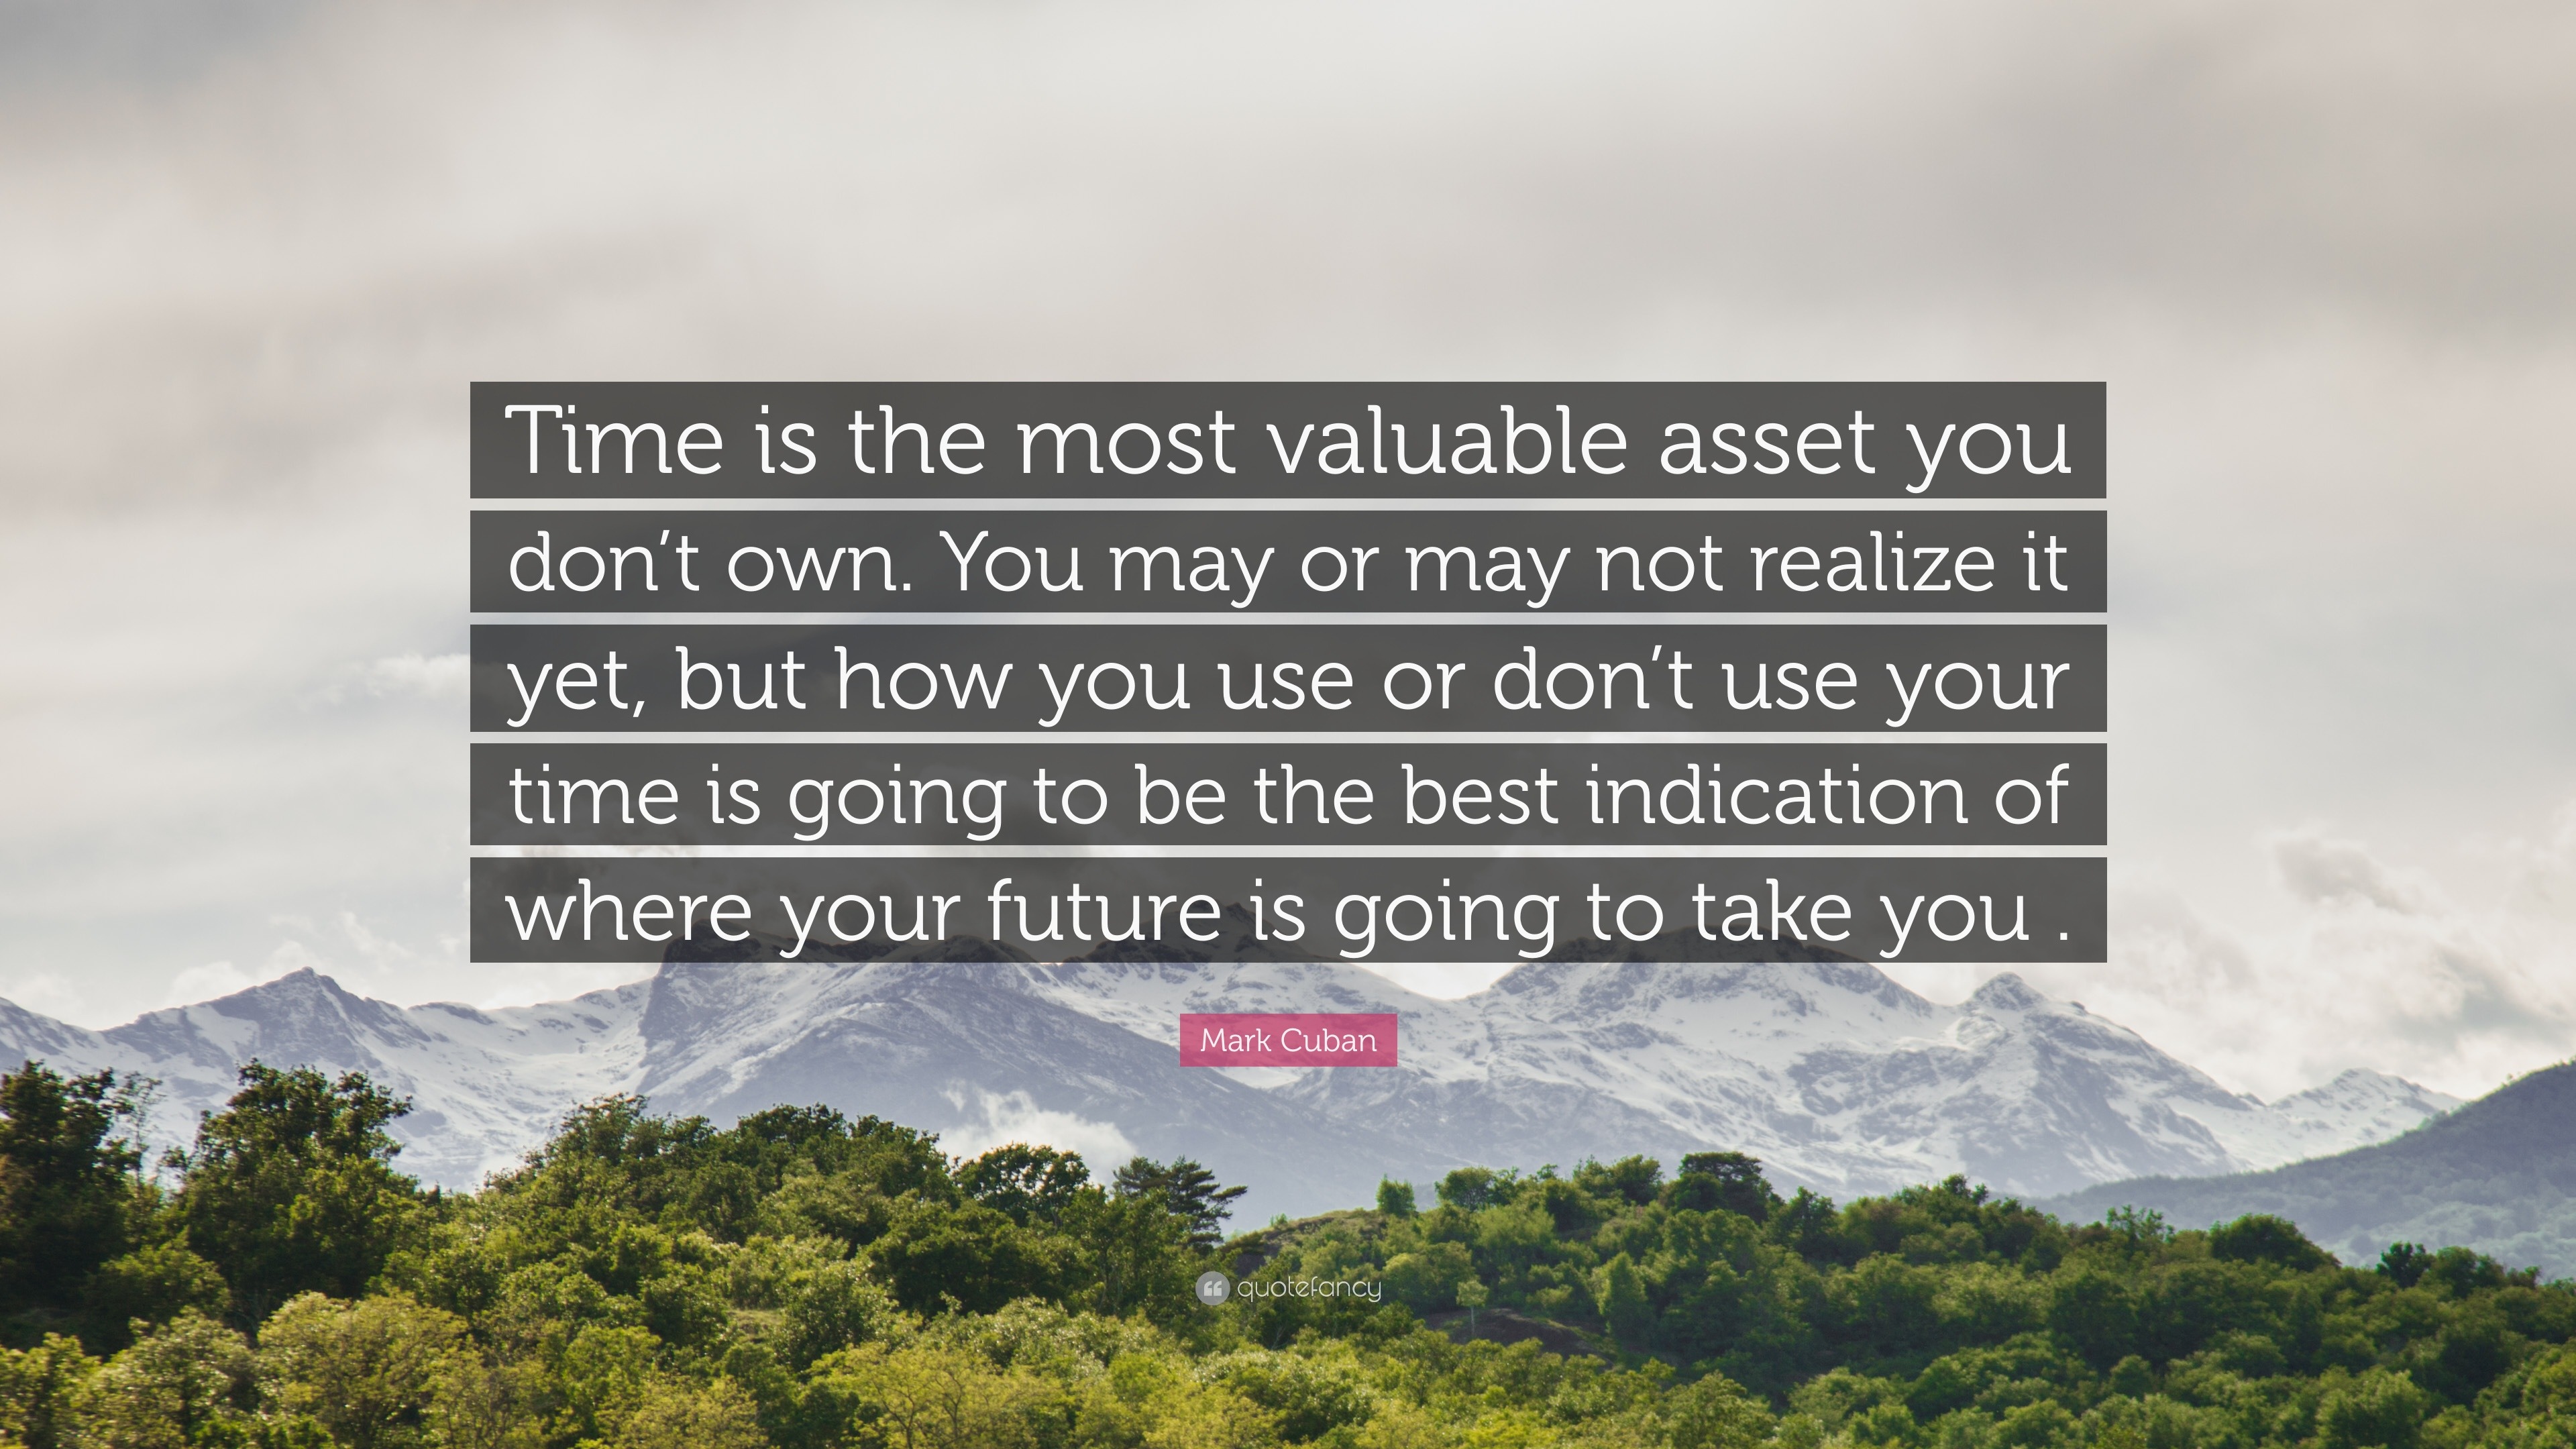 Mark Cuban Quote: “Time is the most valuable asset you don't own